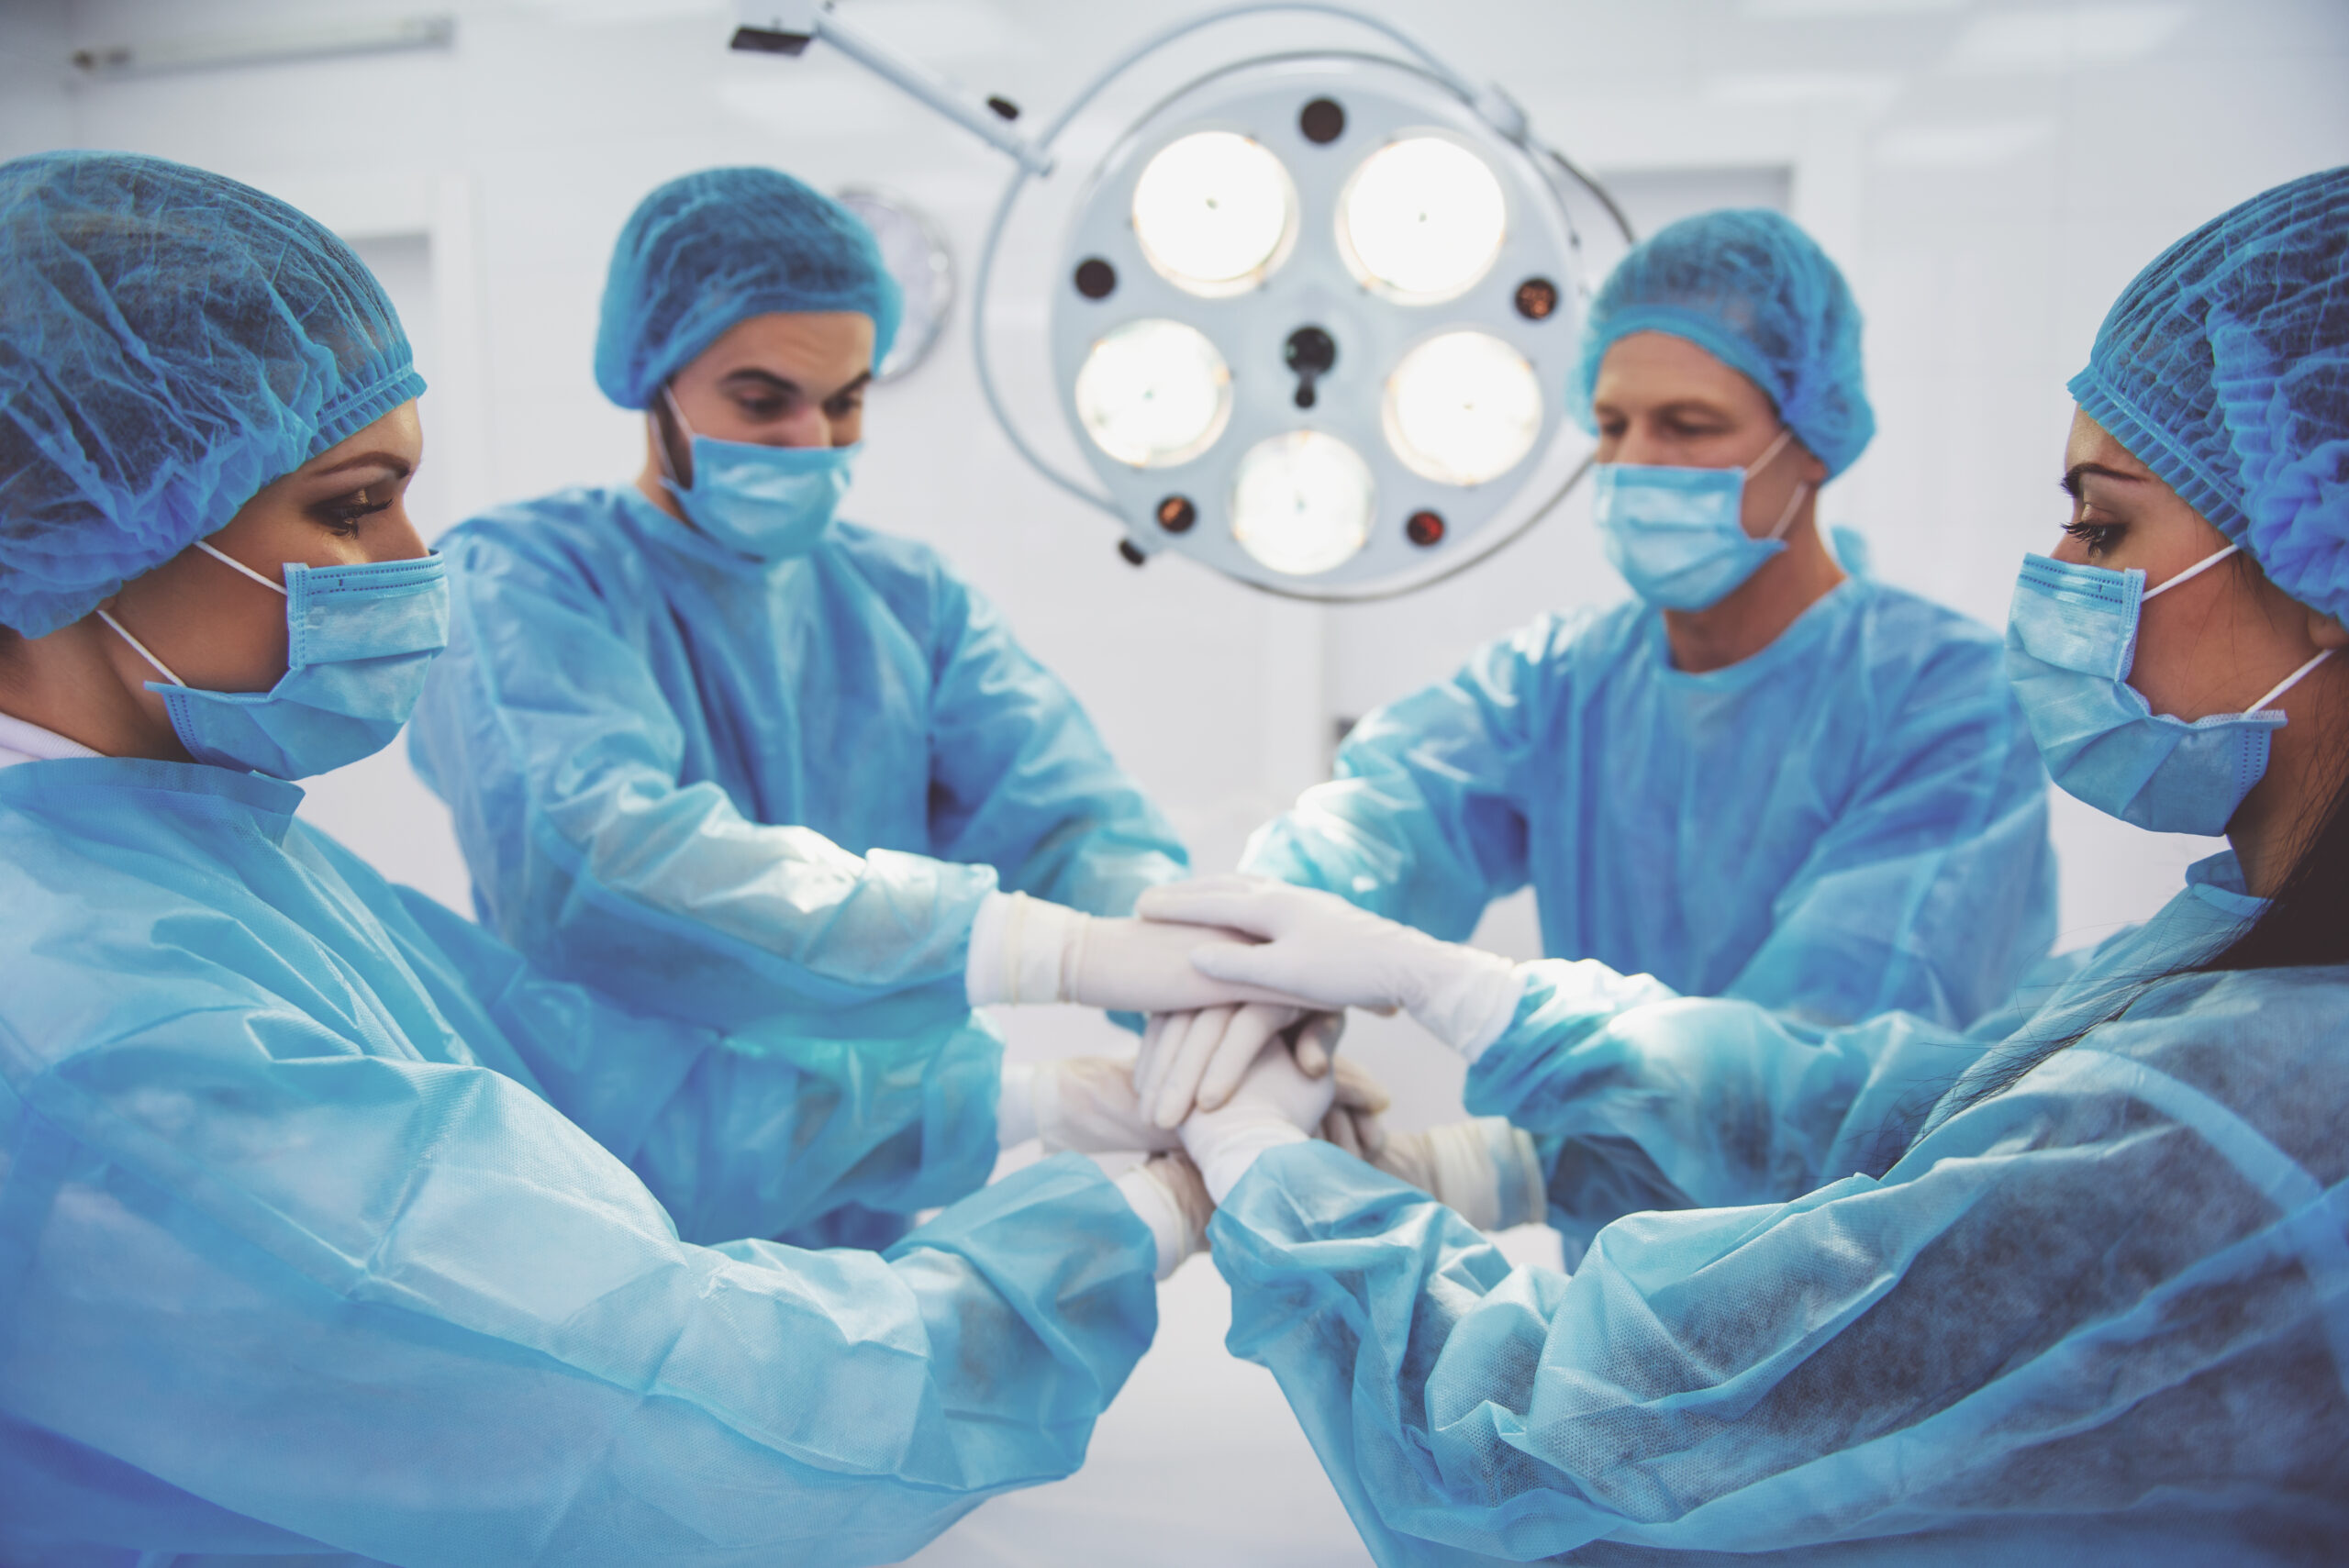 Team surgeons are putting their hands together, standing in a modern operating room